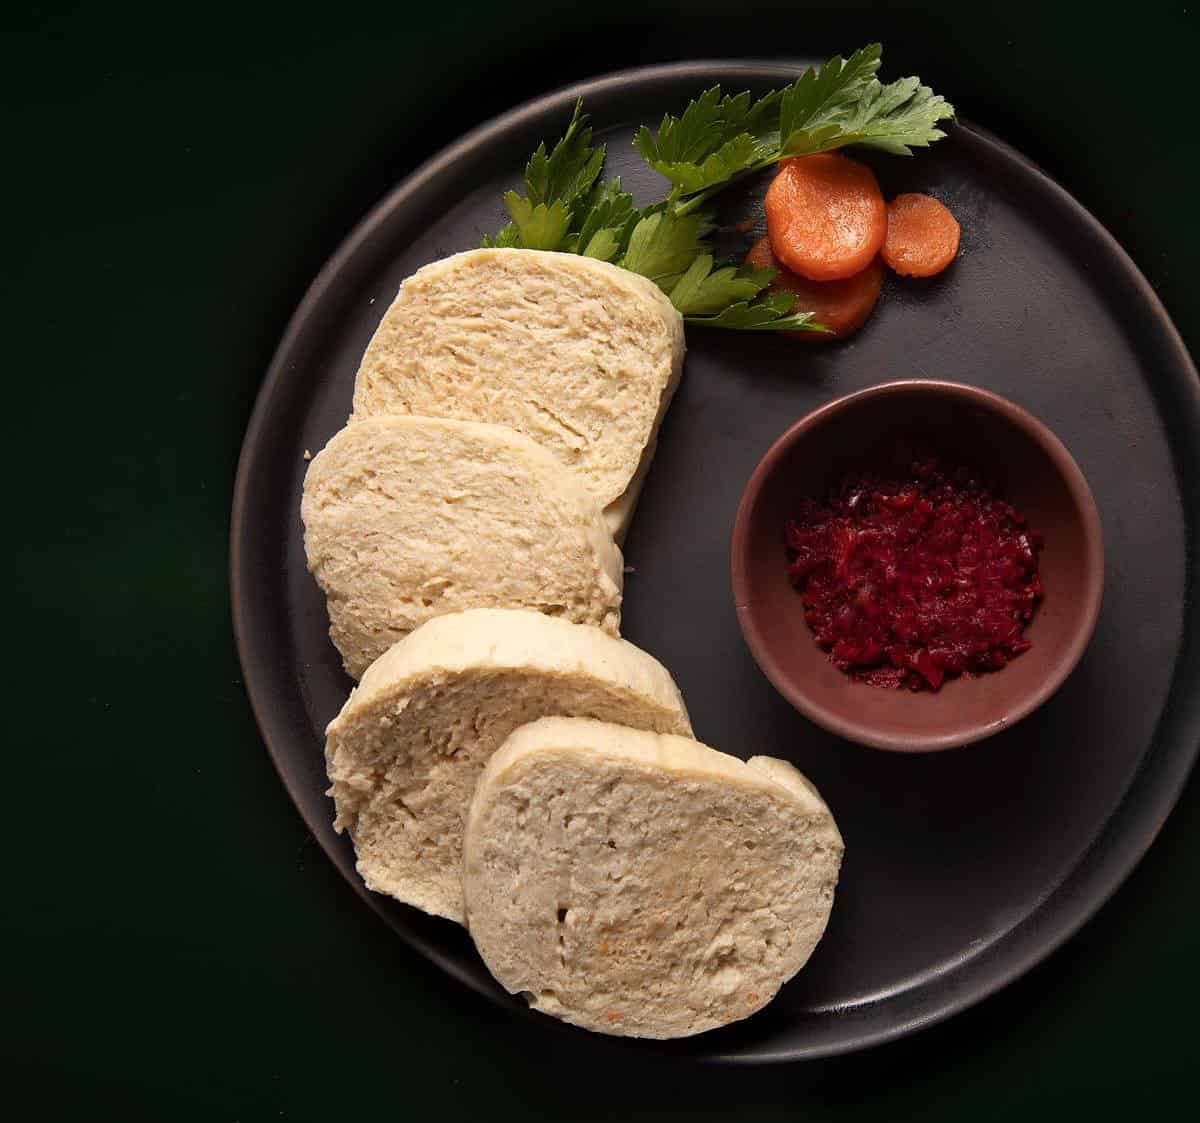  One bite of our homemade Gefilte Fish and you'll be transported to grandma's table.